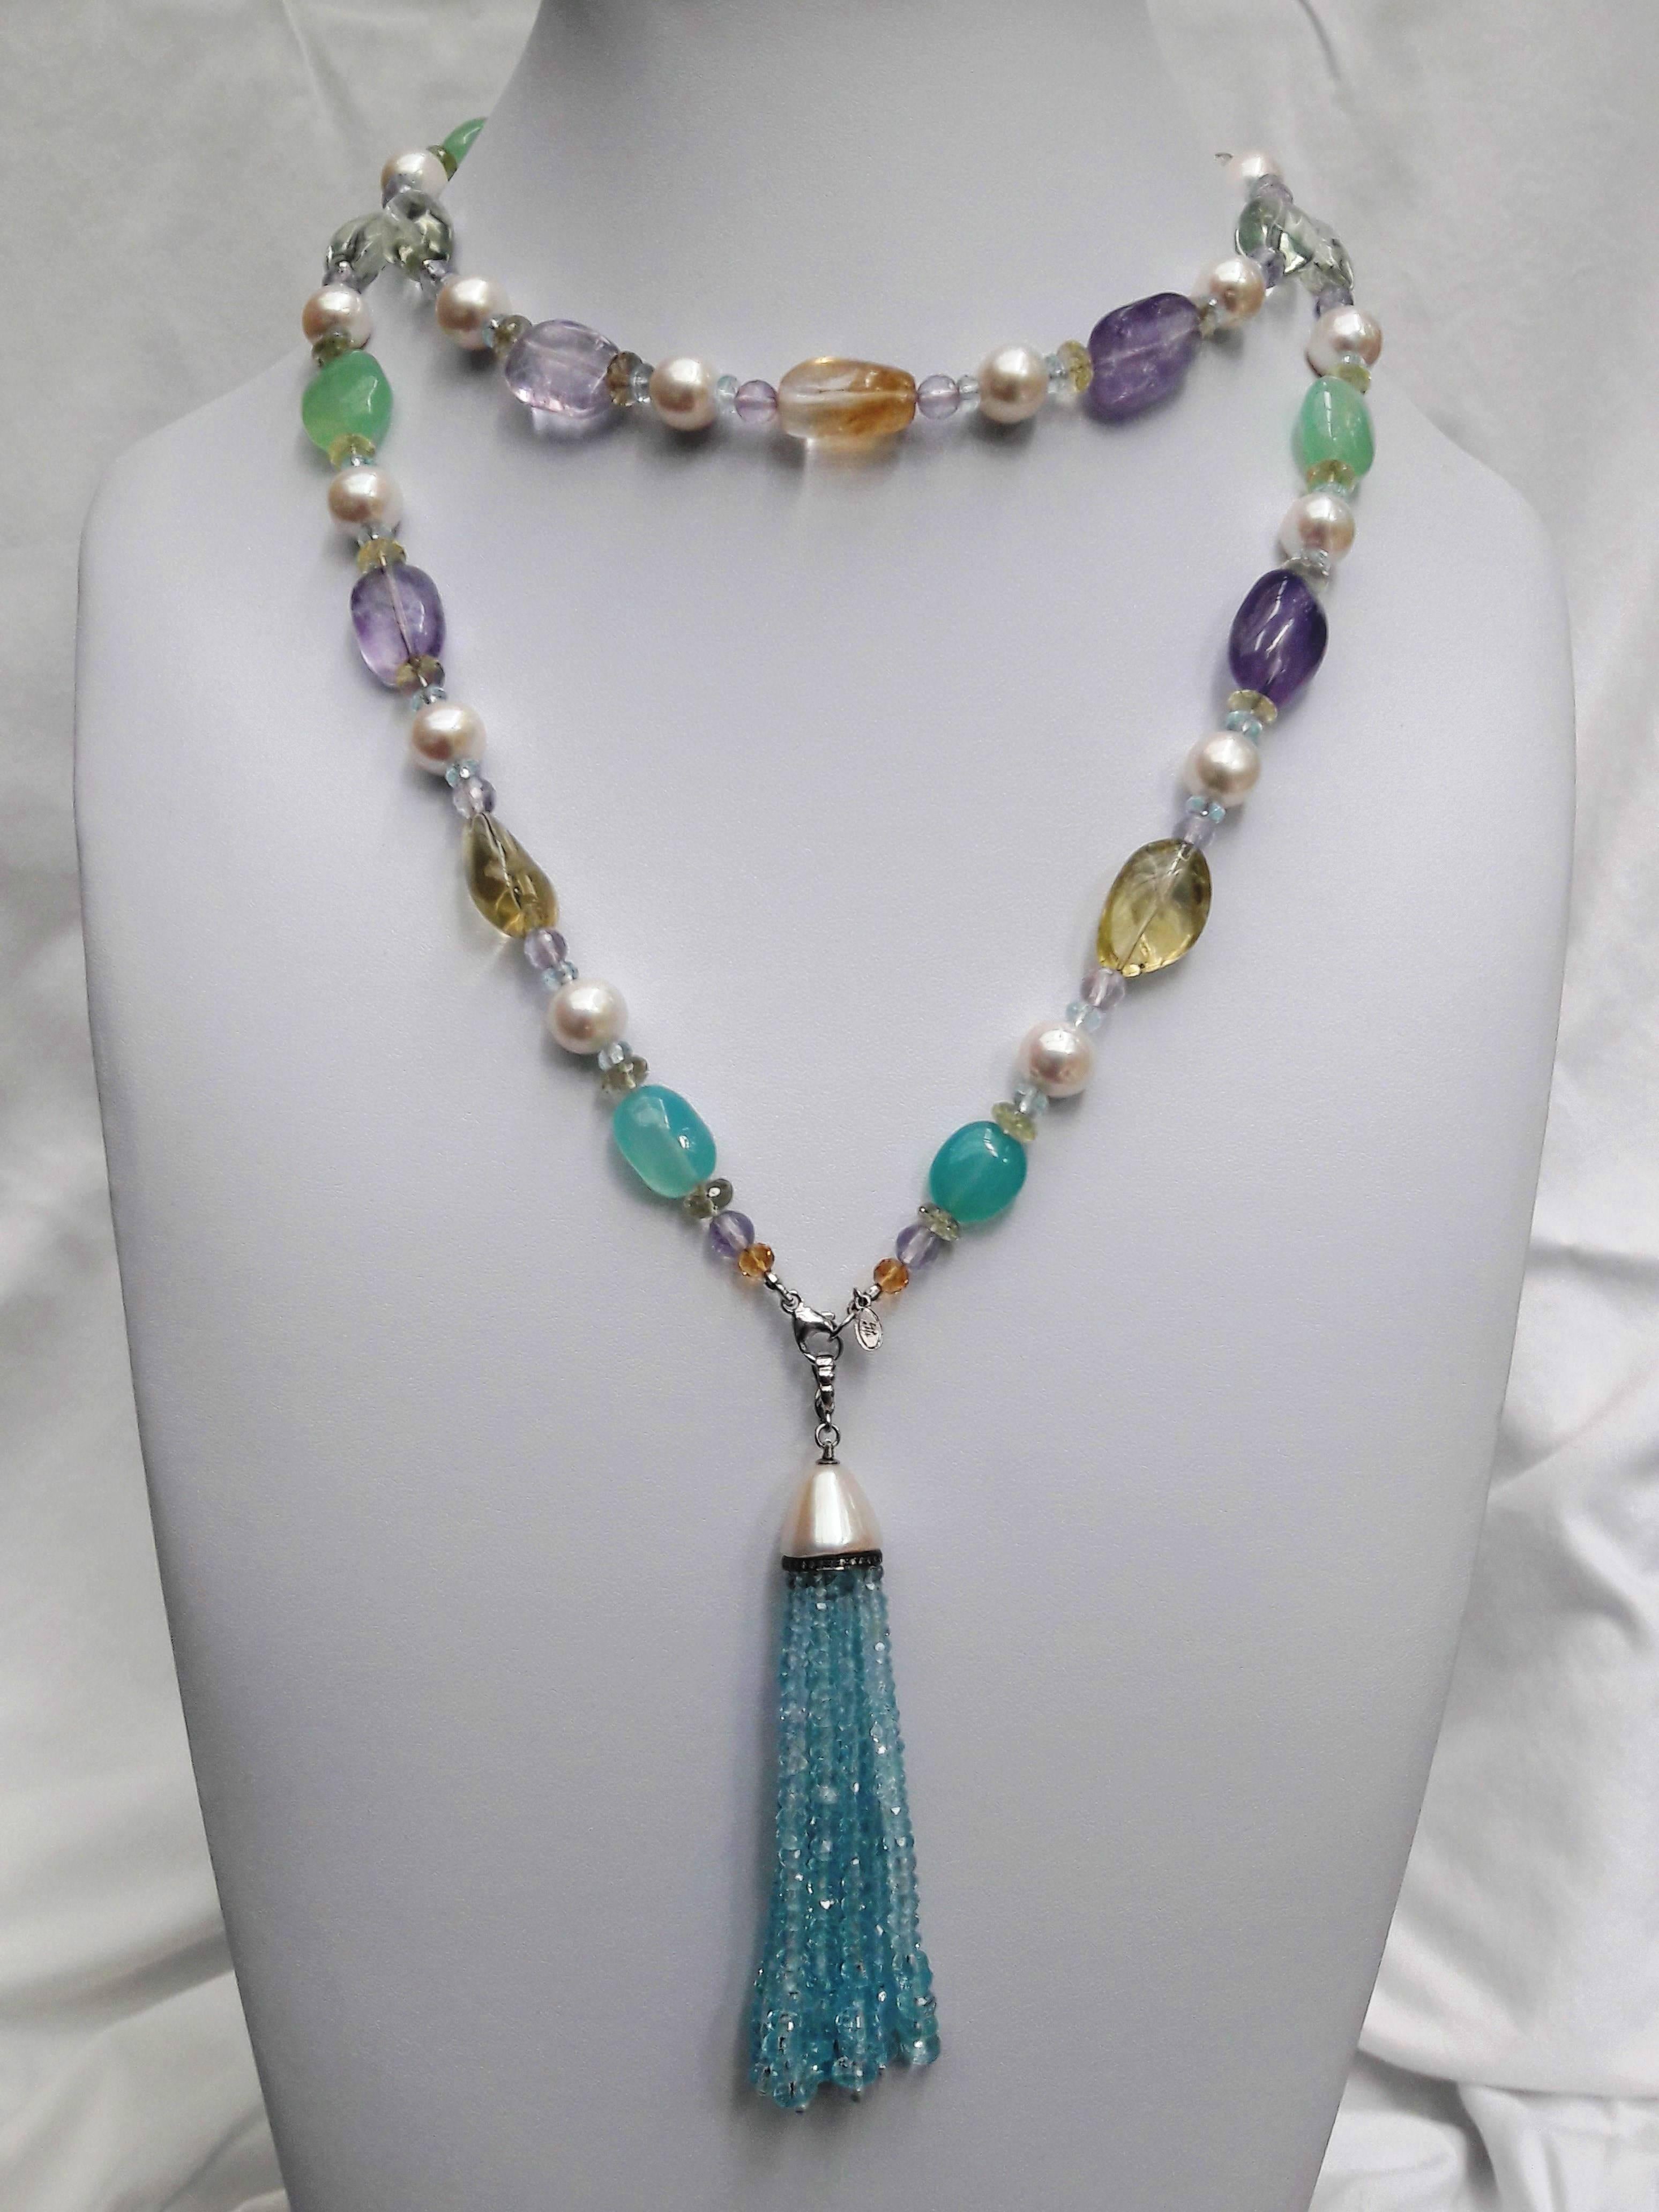 Large round pearls are paired with Amethyst, Citrine, Aquamarine, Green Garnet and Fluorite beads to create a gorgeous shimmering piece. The semiprecious stones highlight the luster and iridescence of the pearls, and are divided with small faceted